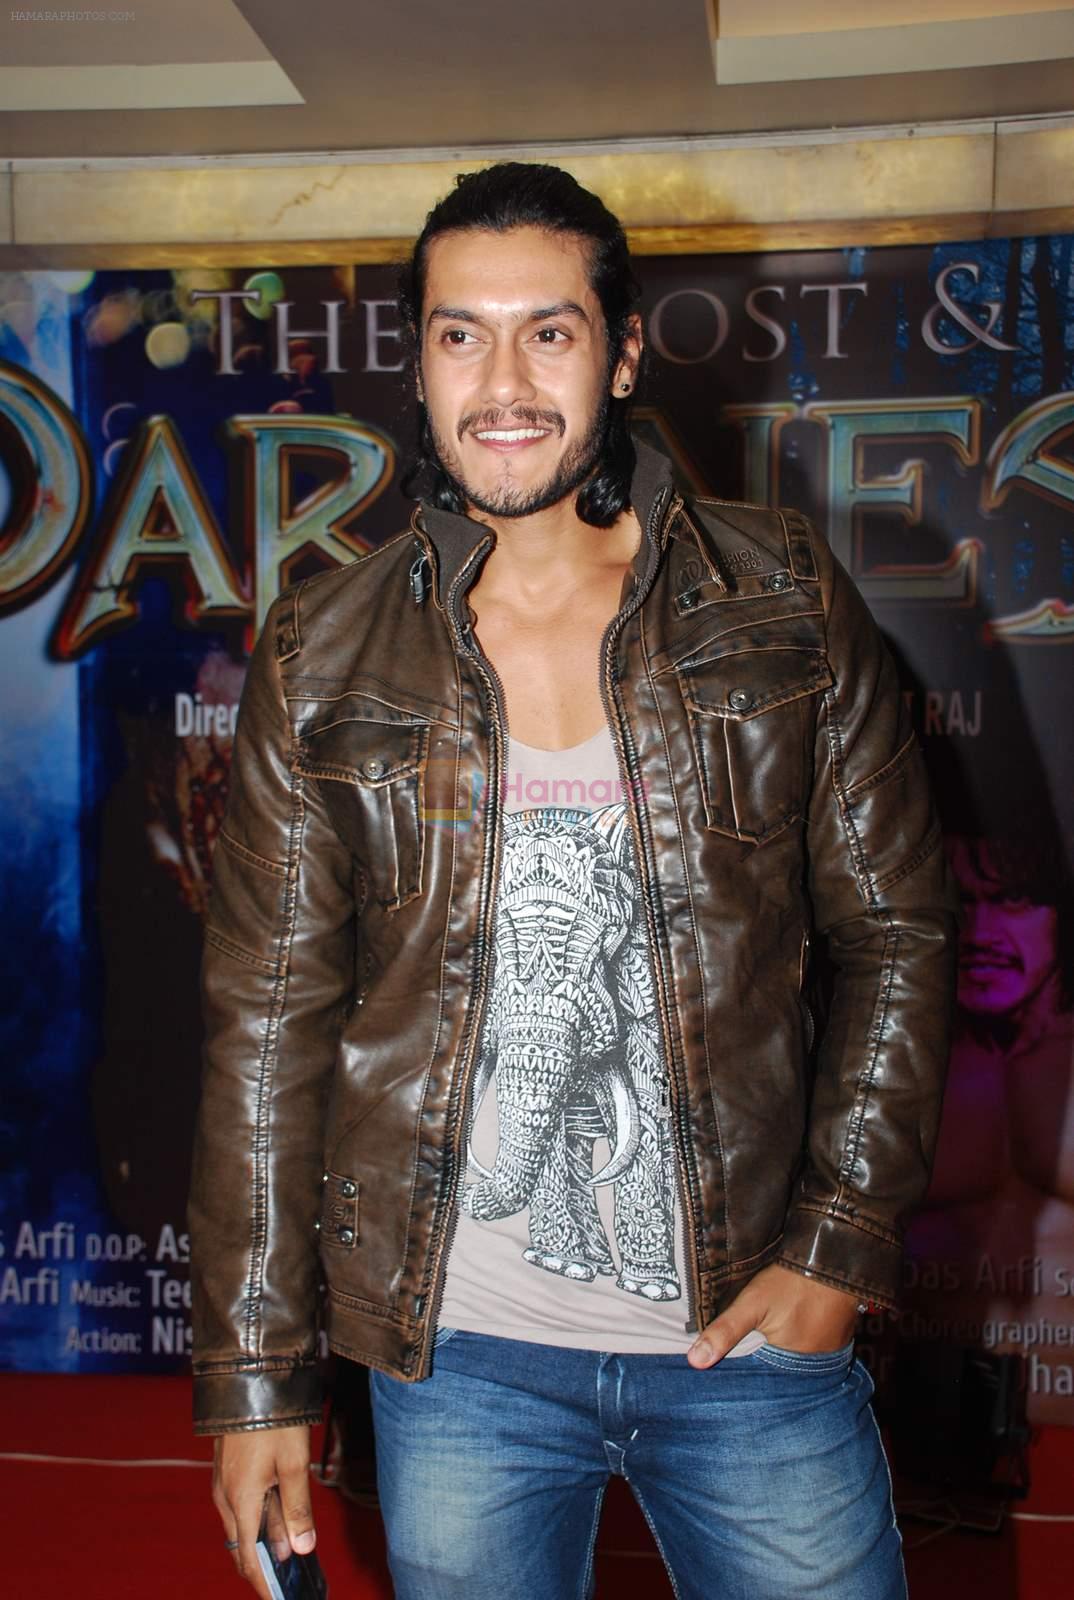 at The Ghost and darkness music launch in Time N Again on 5th March 2015